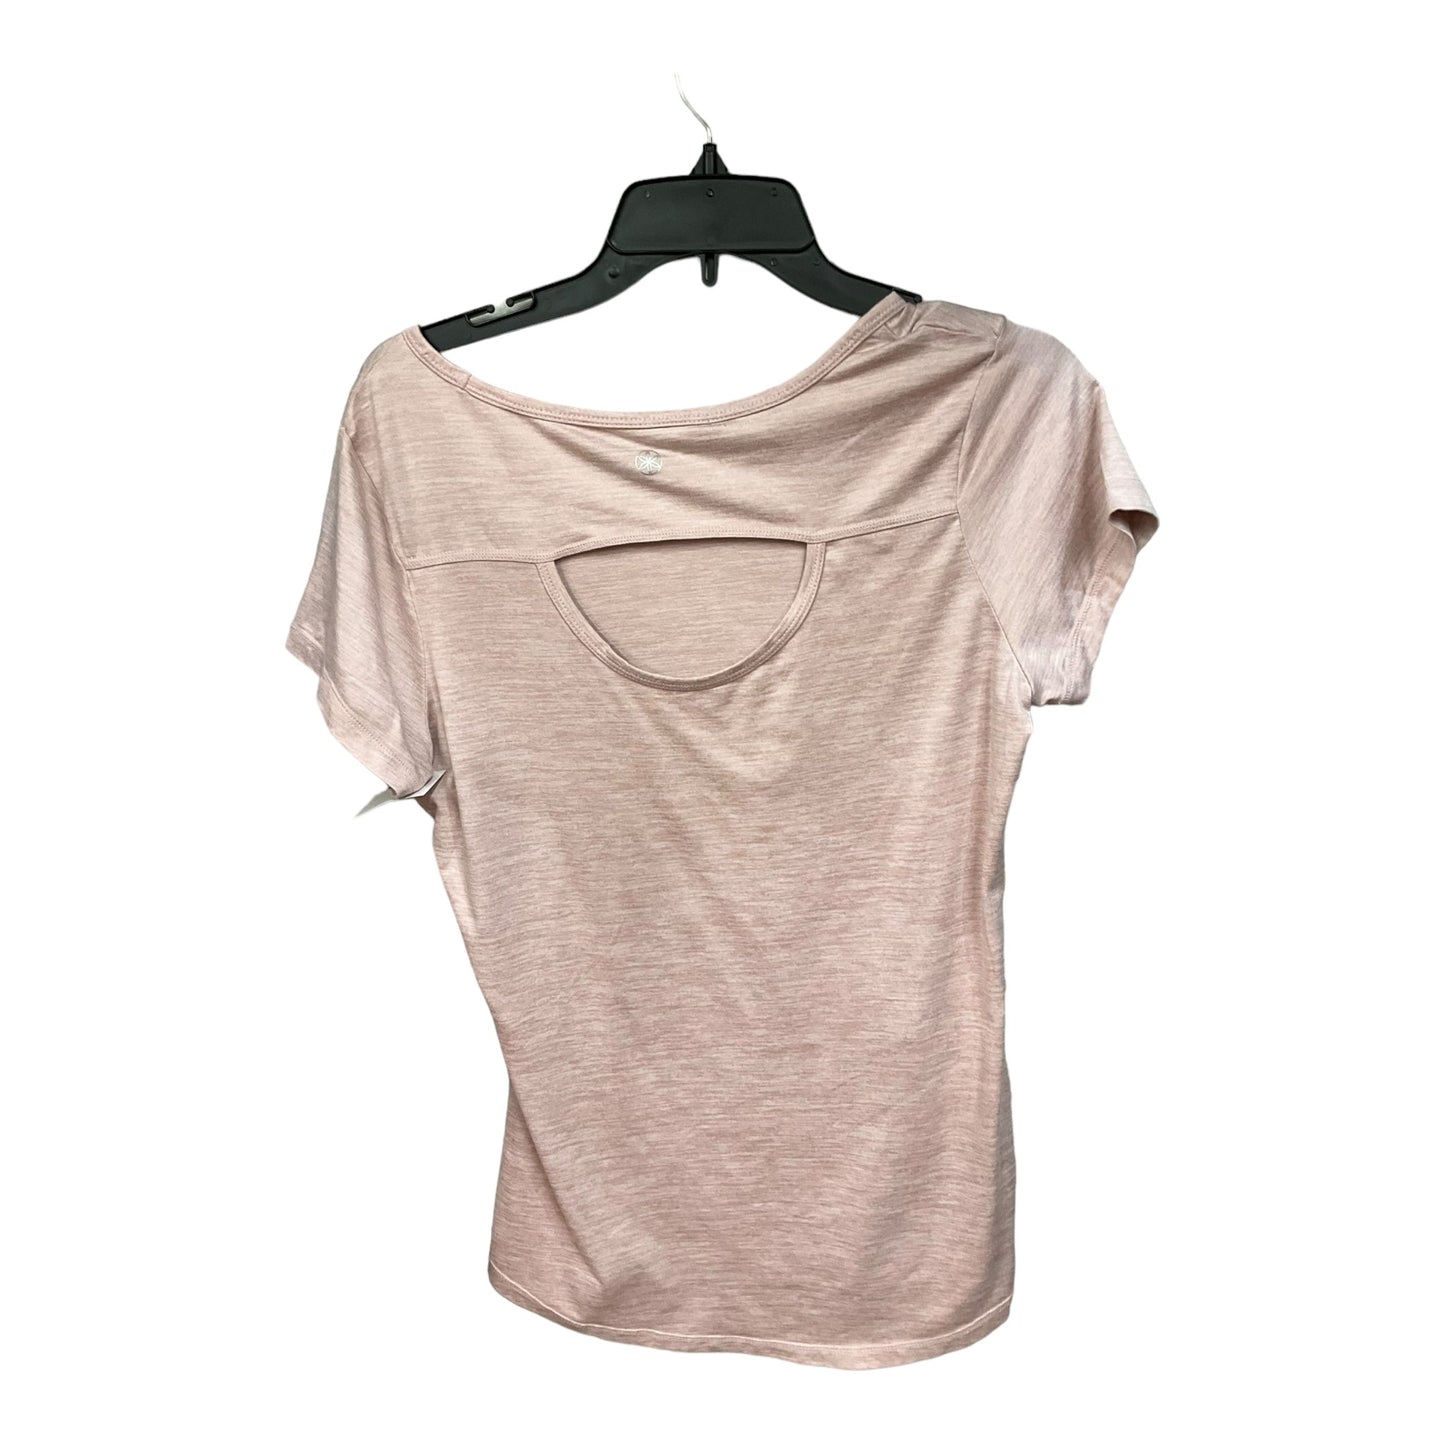 Pink Top Short Sleeve Gaiam, Size M